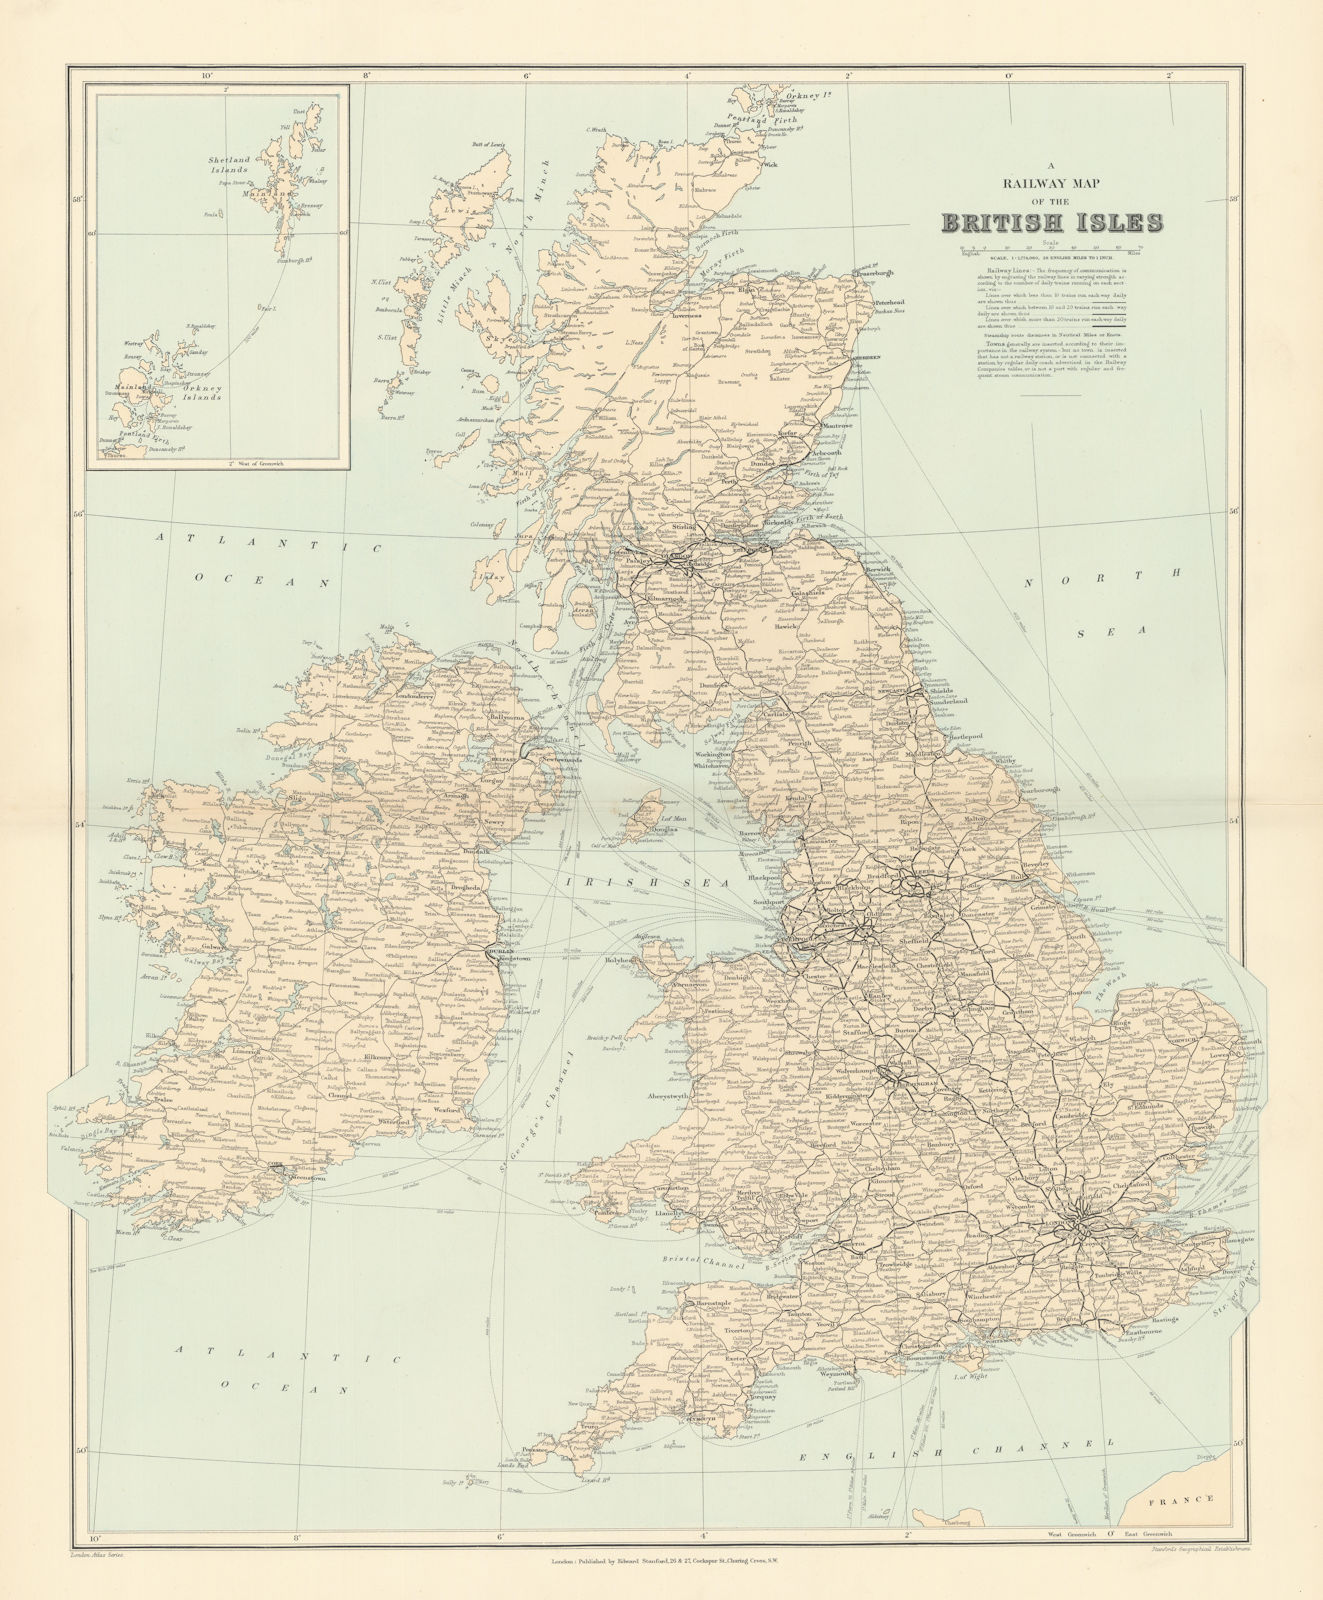 Associate Product Railway map of the British Isles. England Ireland Scotland Wales. STANFORD 1896